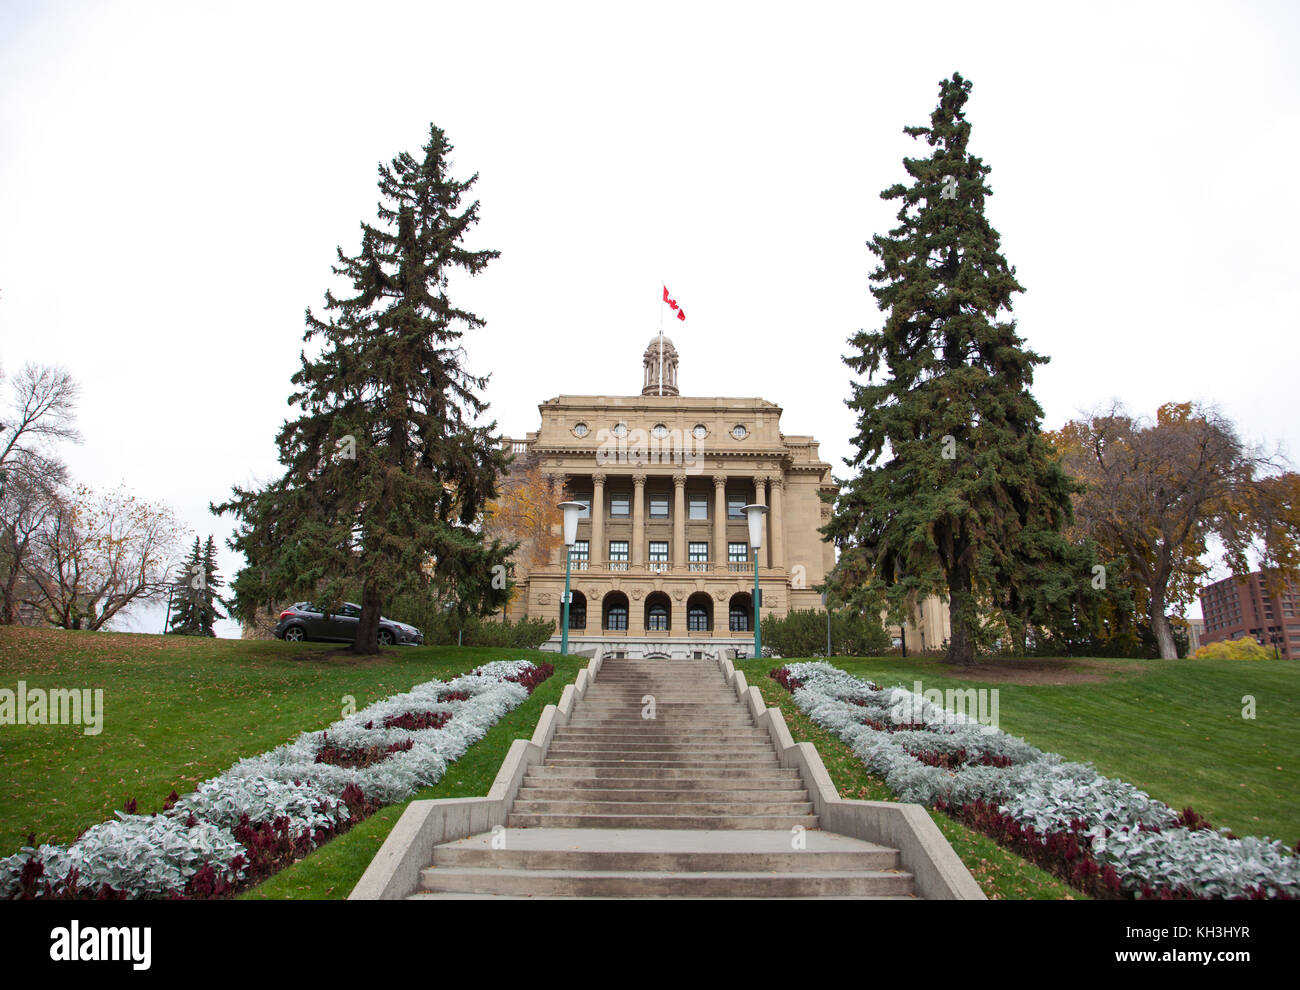 on October 6, 2017: the alberta legislature building and grounds Stock Photo